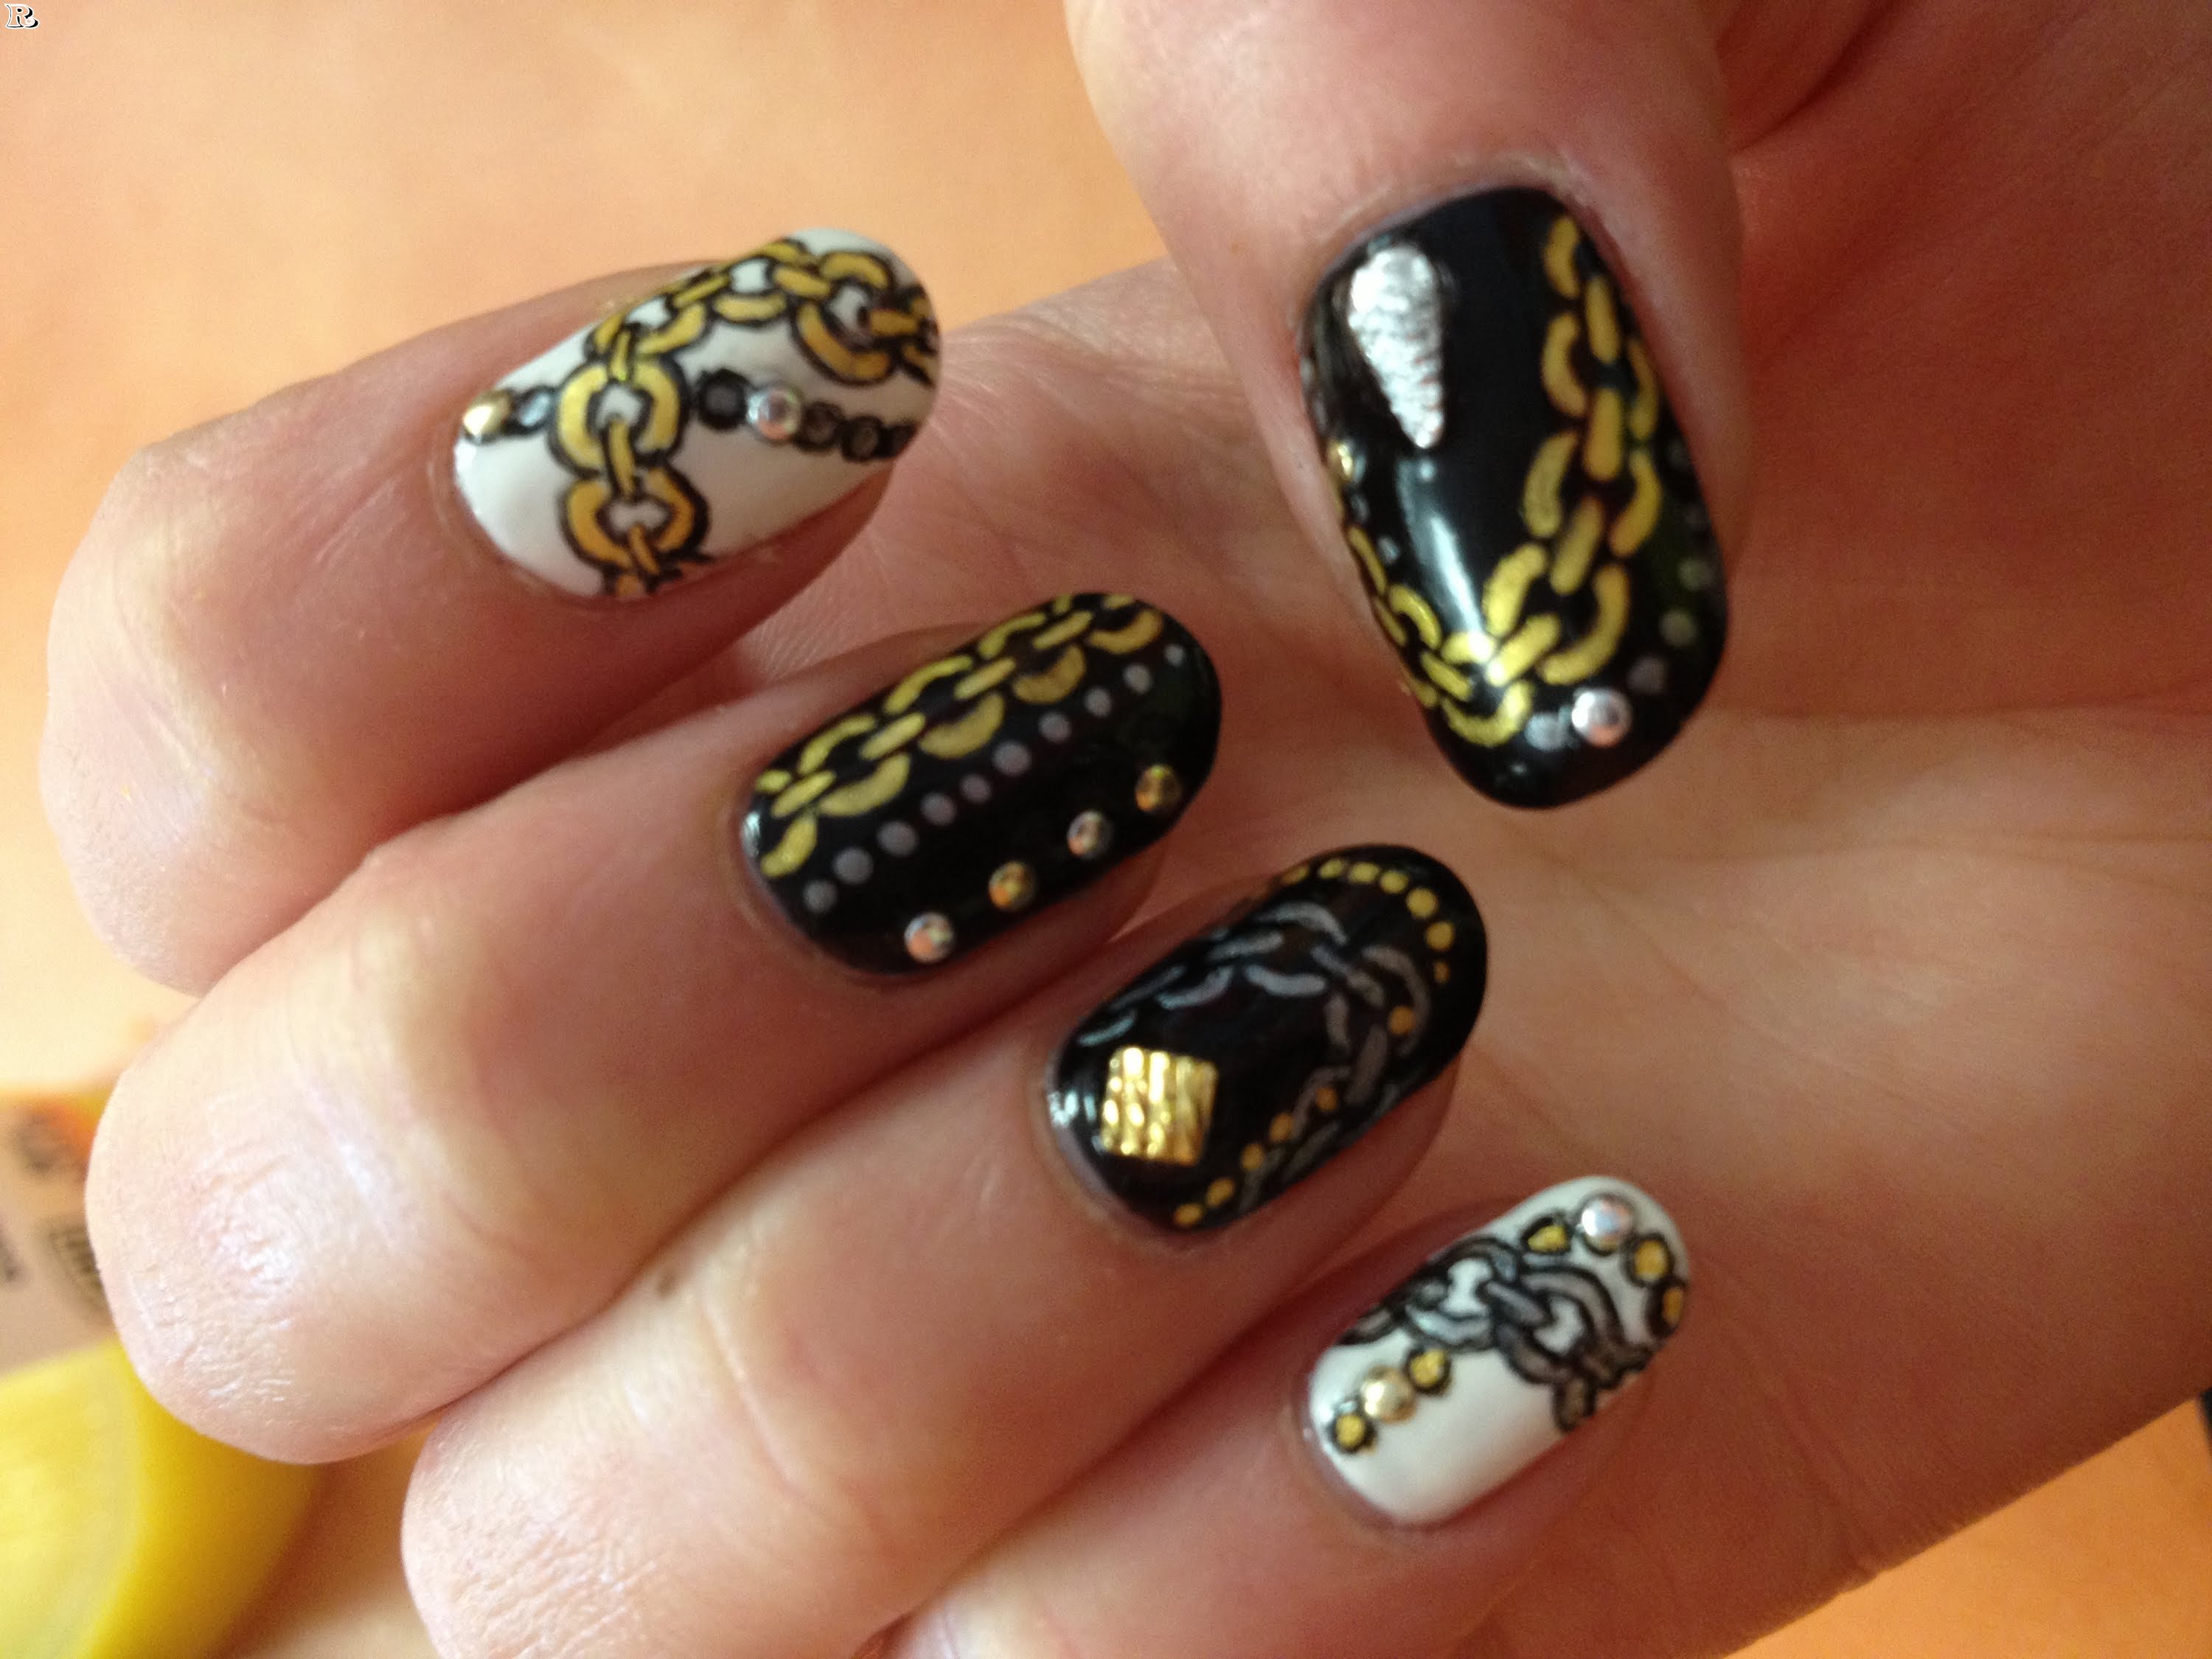 10. Bead Chain Nail Art Trends - wide 1